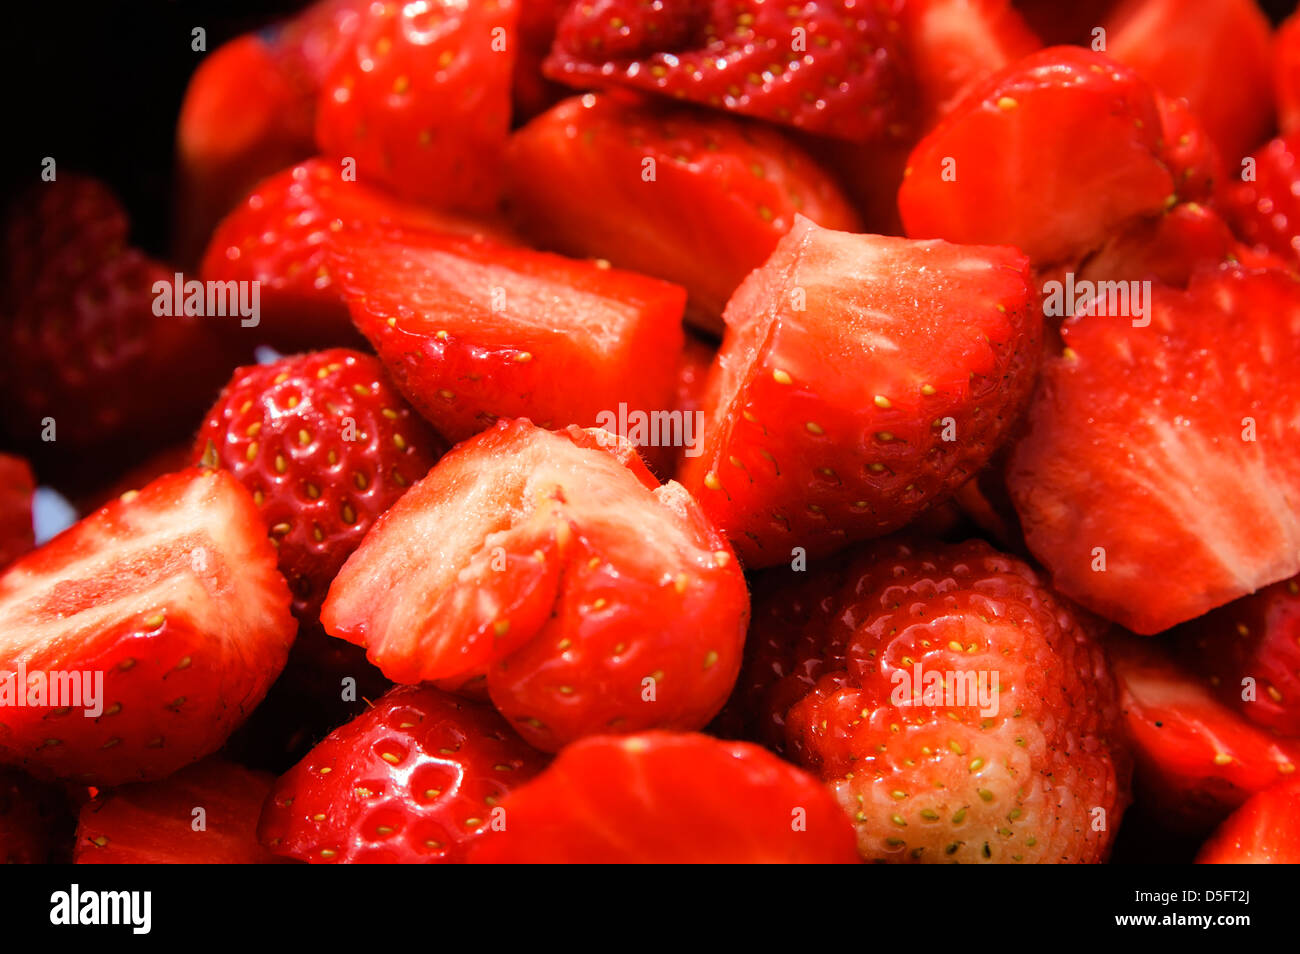 A summery feel with juicy strawberries. Stock Photo